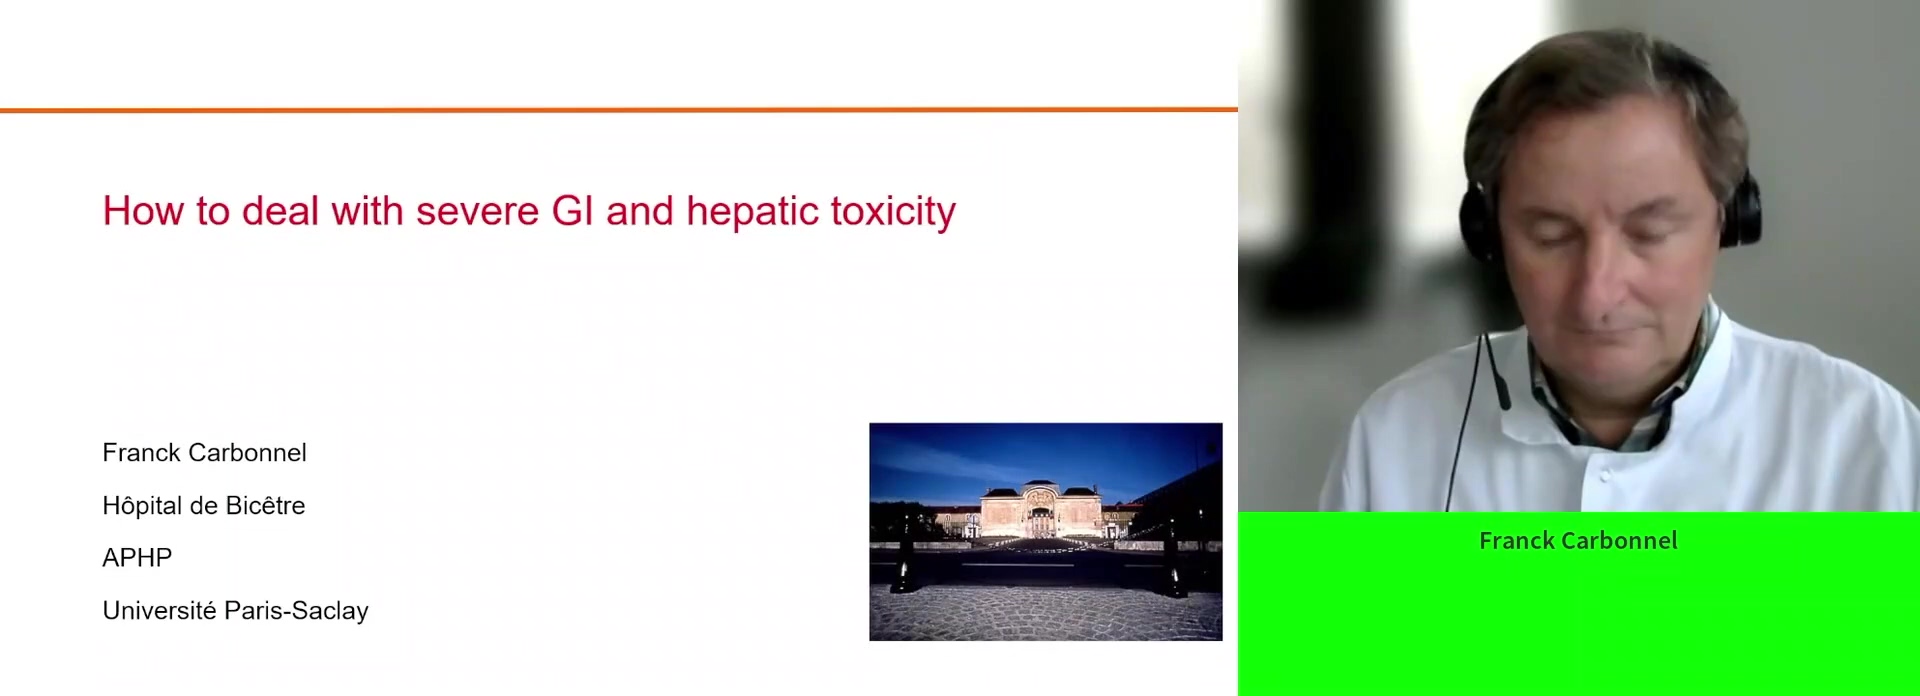 How to deal with severe GI and hepatic toxicity